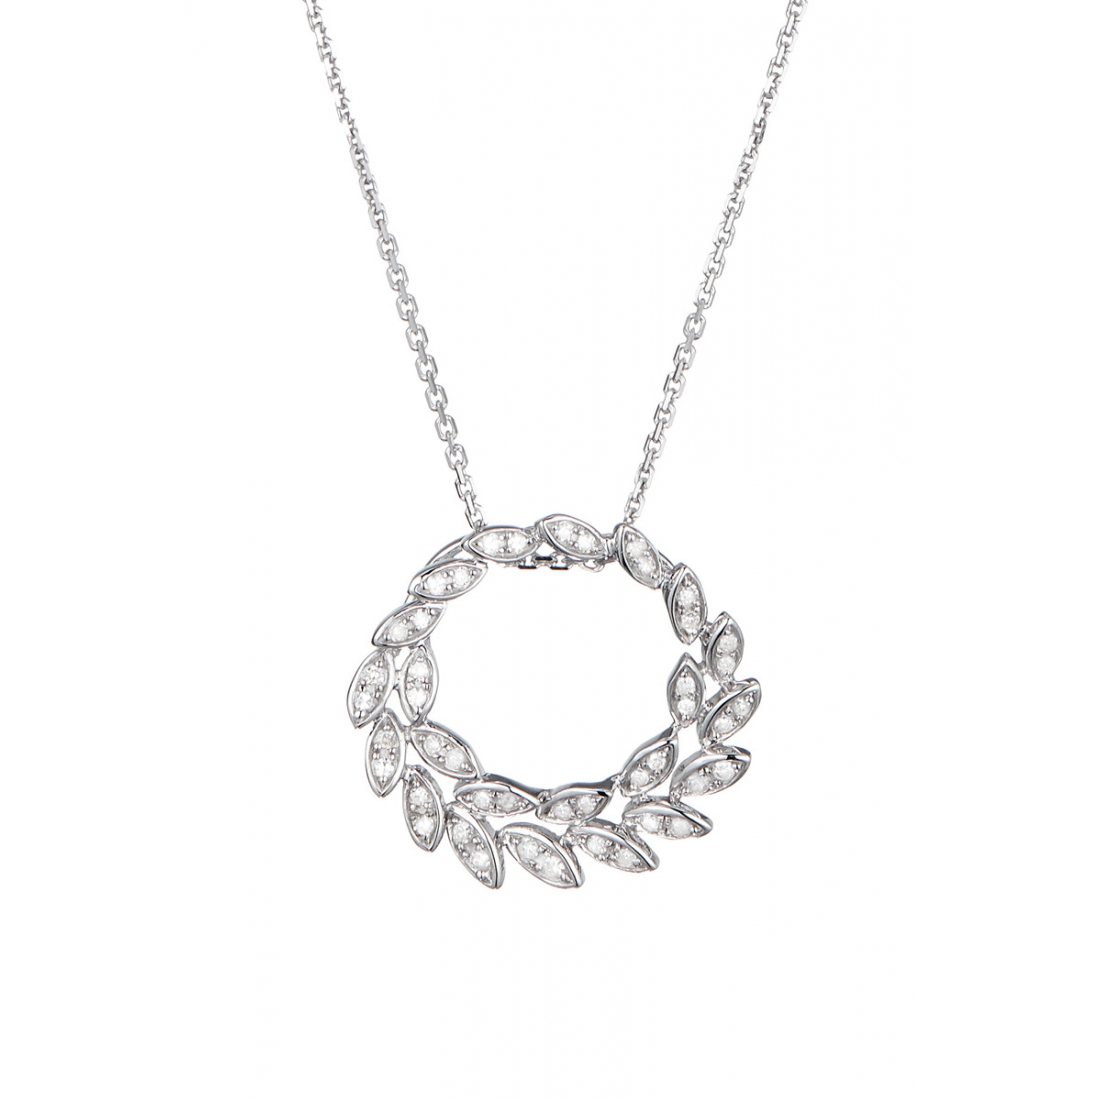 Women's 'Comme une Feuille' Pendant with chain